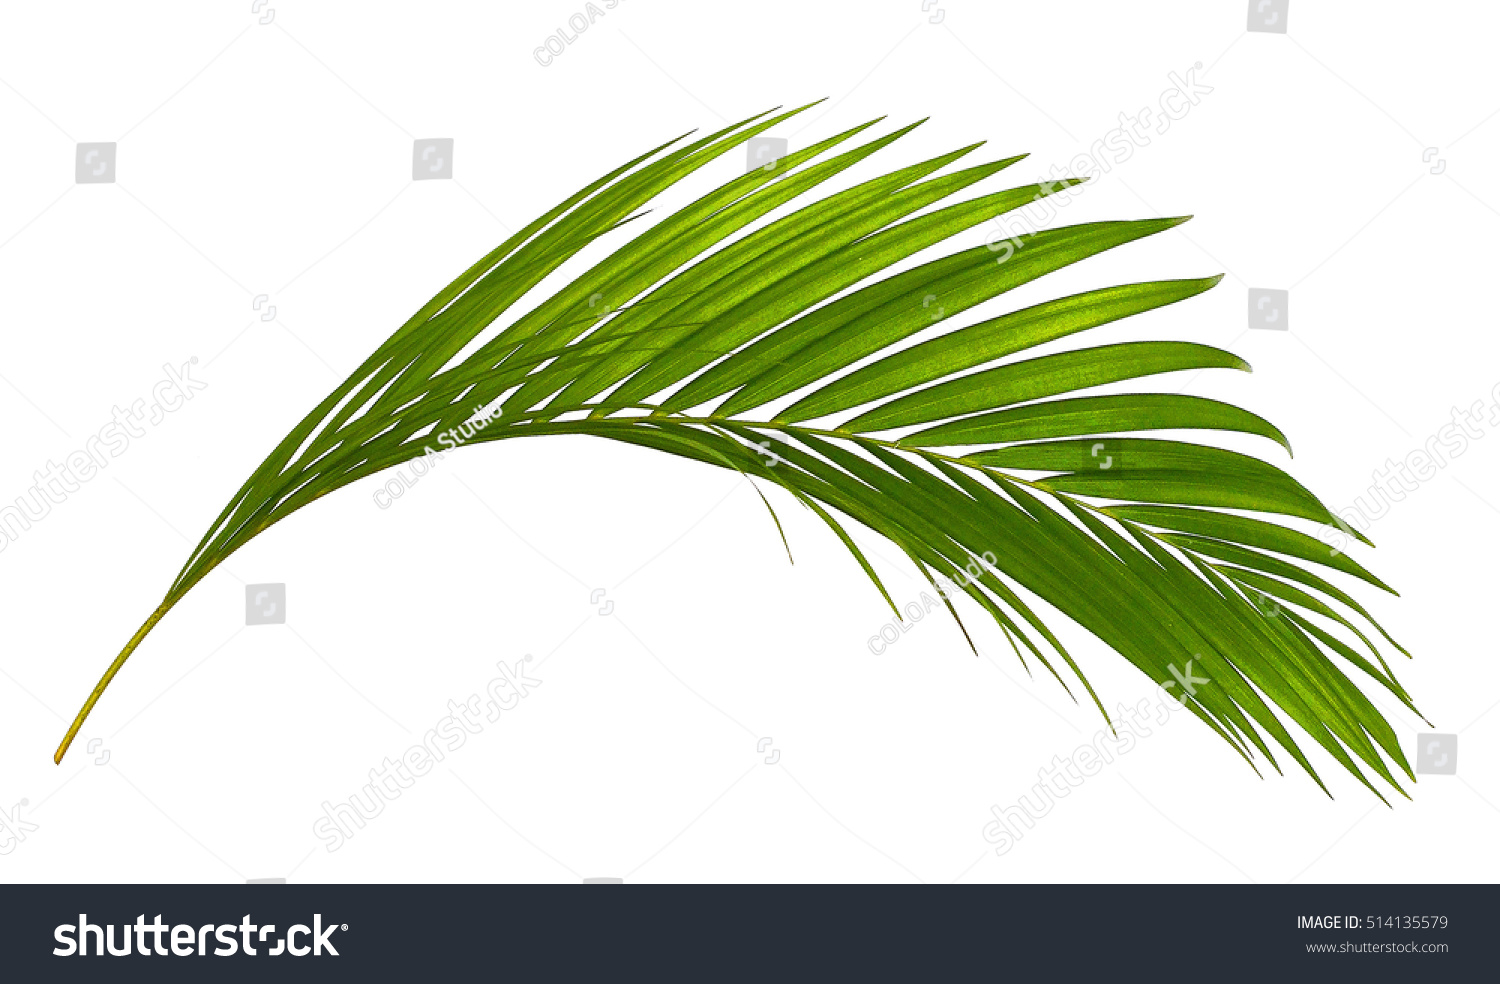 Green leaves of palm tree isolated on white background #514135579